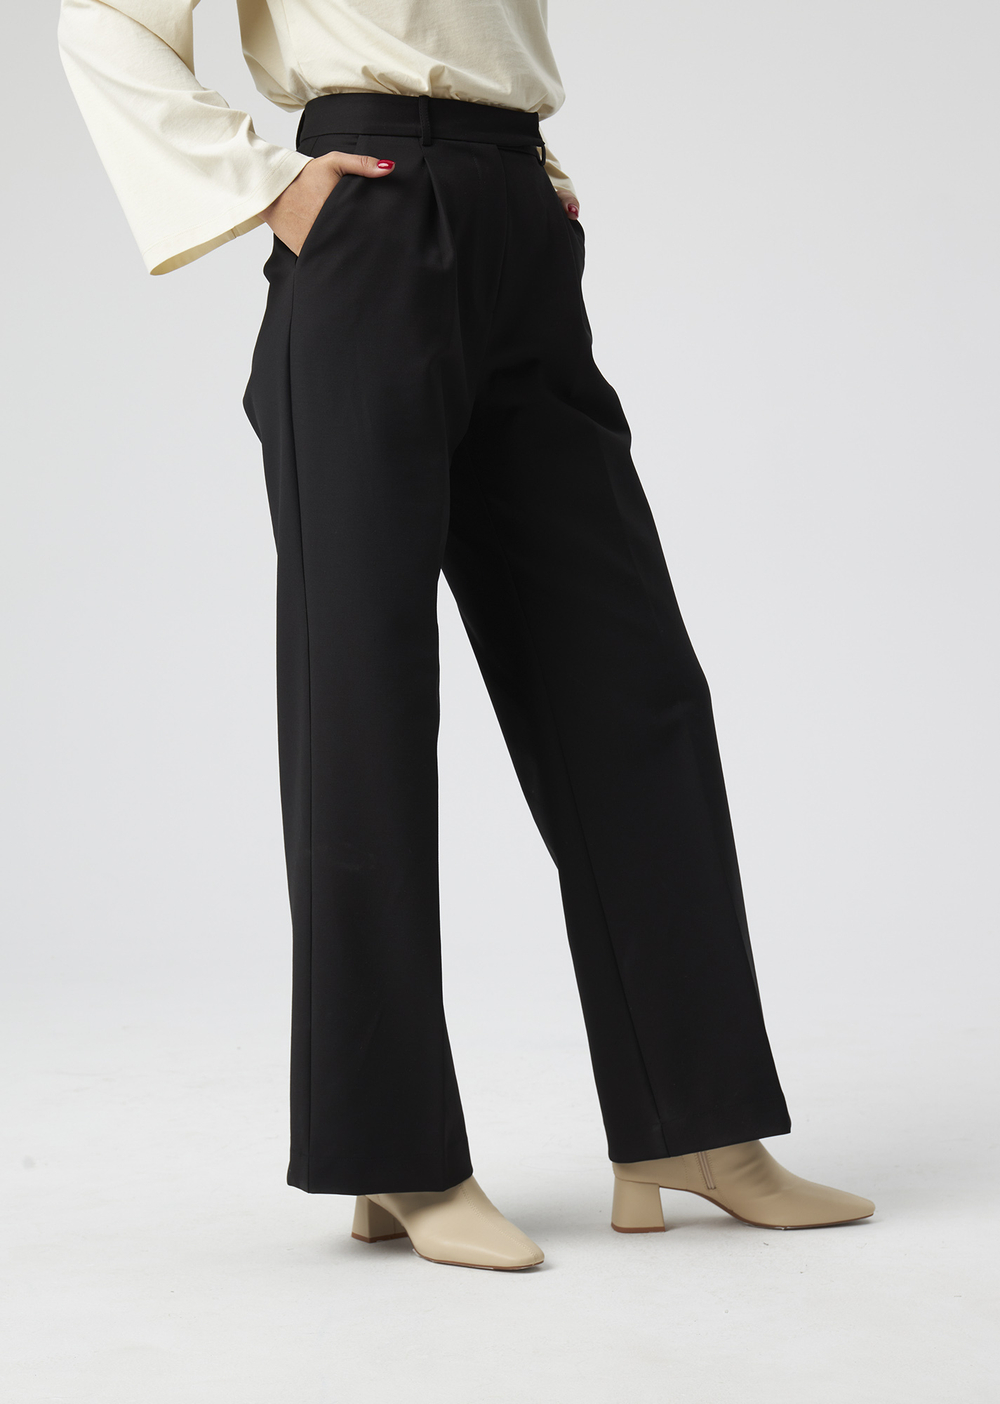 TROUSERS | S | BLACK